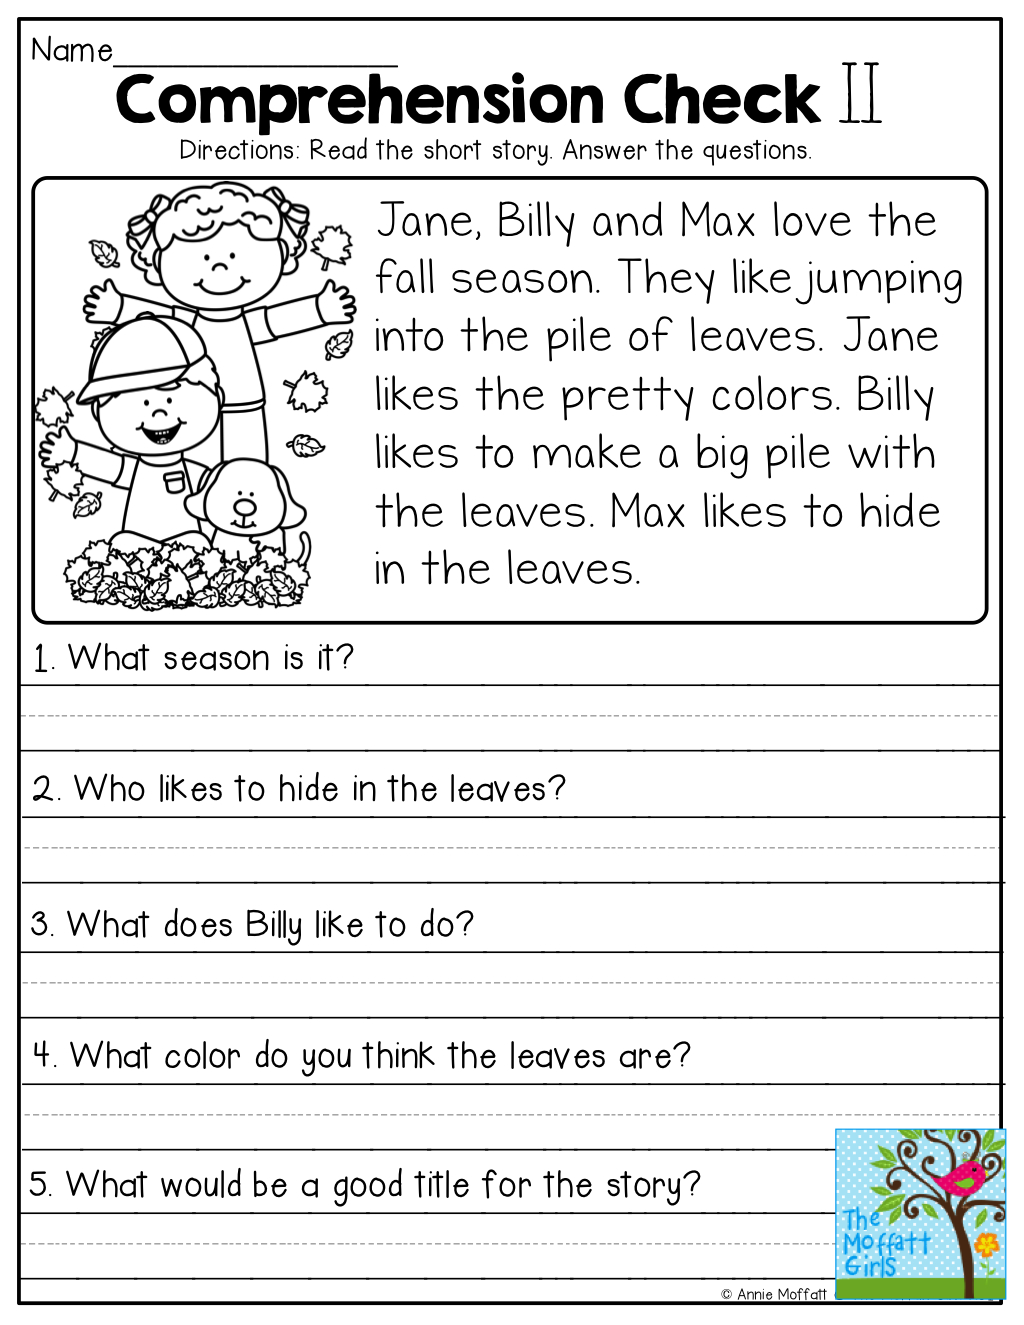 Comprehension Checks And So Many More Useful Printables! | Teaching - Free Printable Short Stories For Grade 3